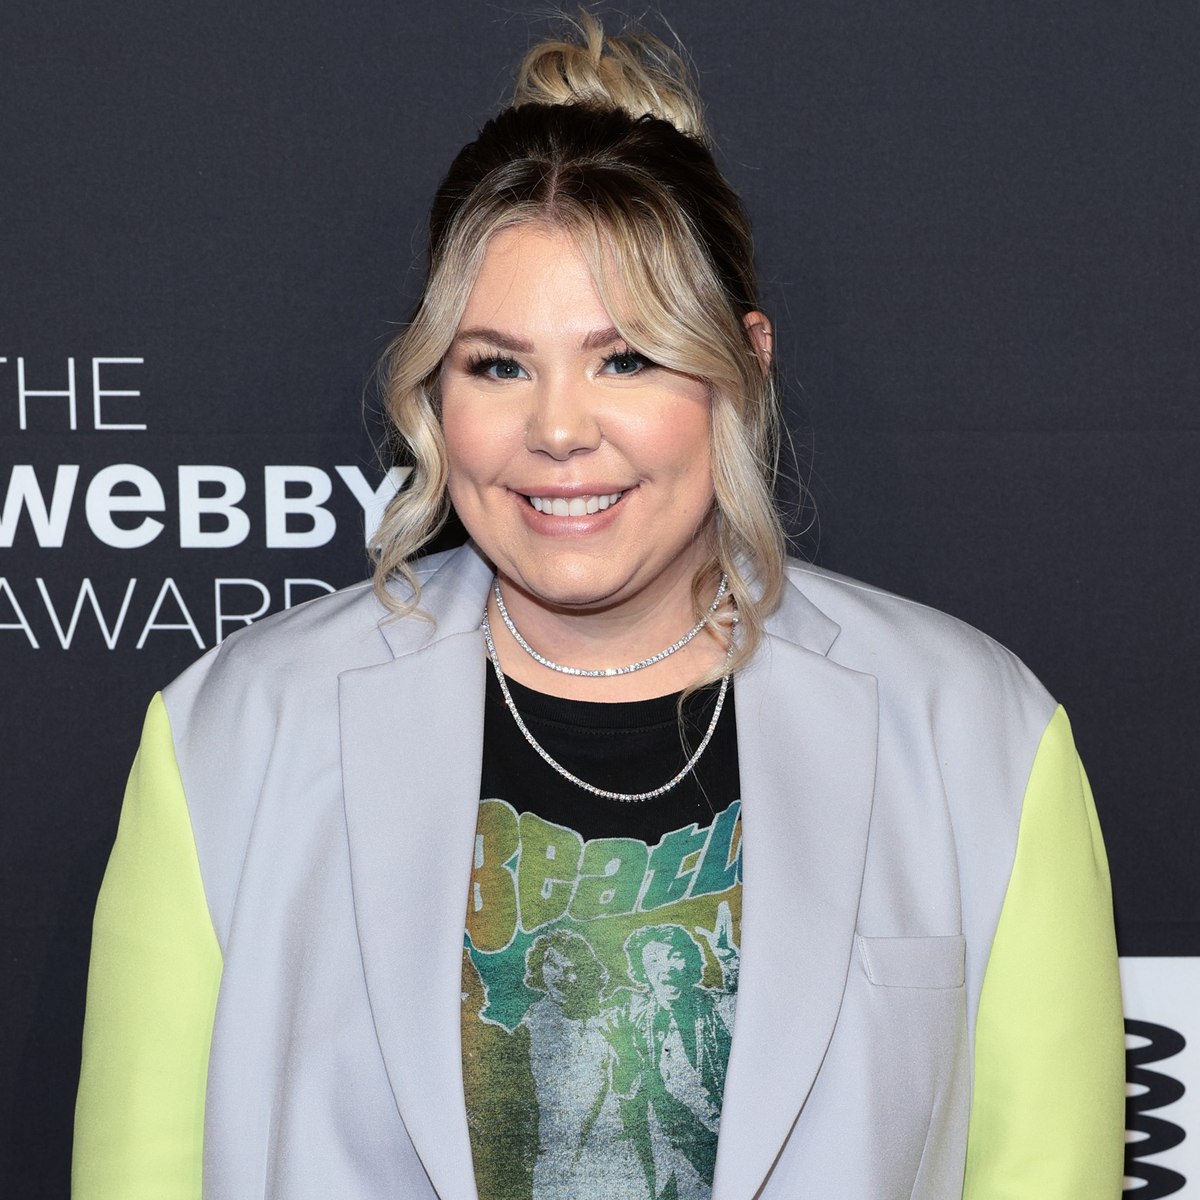 Pregnant Kailyn Lowry Was Considering This Kardashian Baby Name